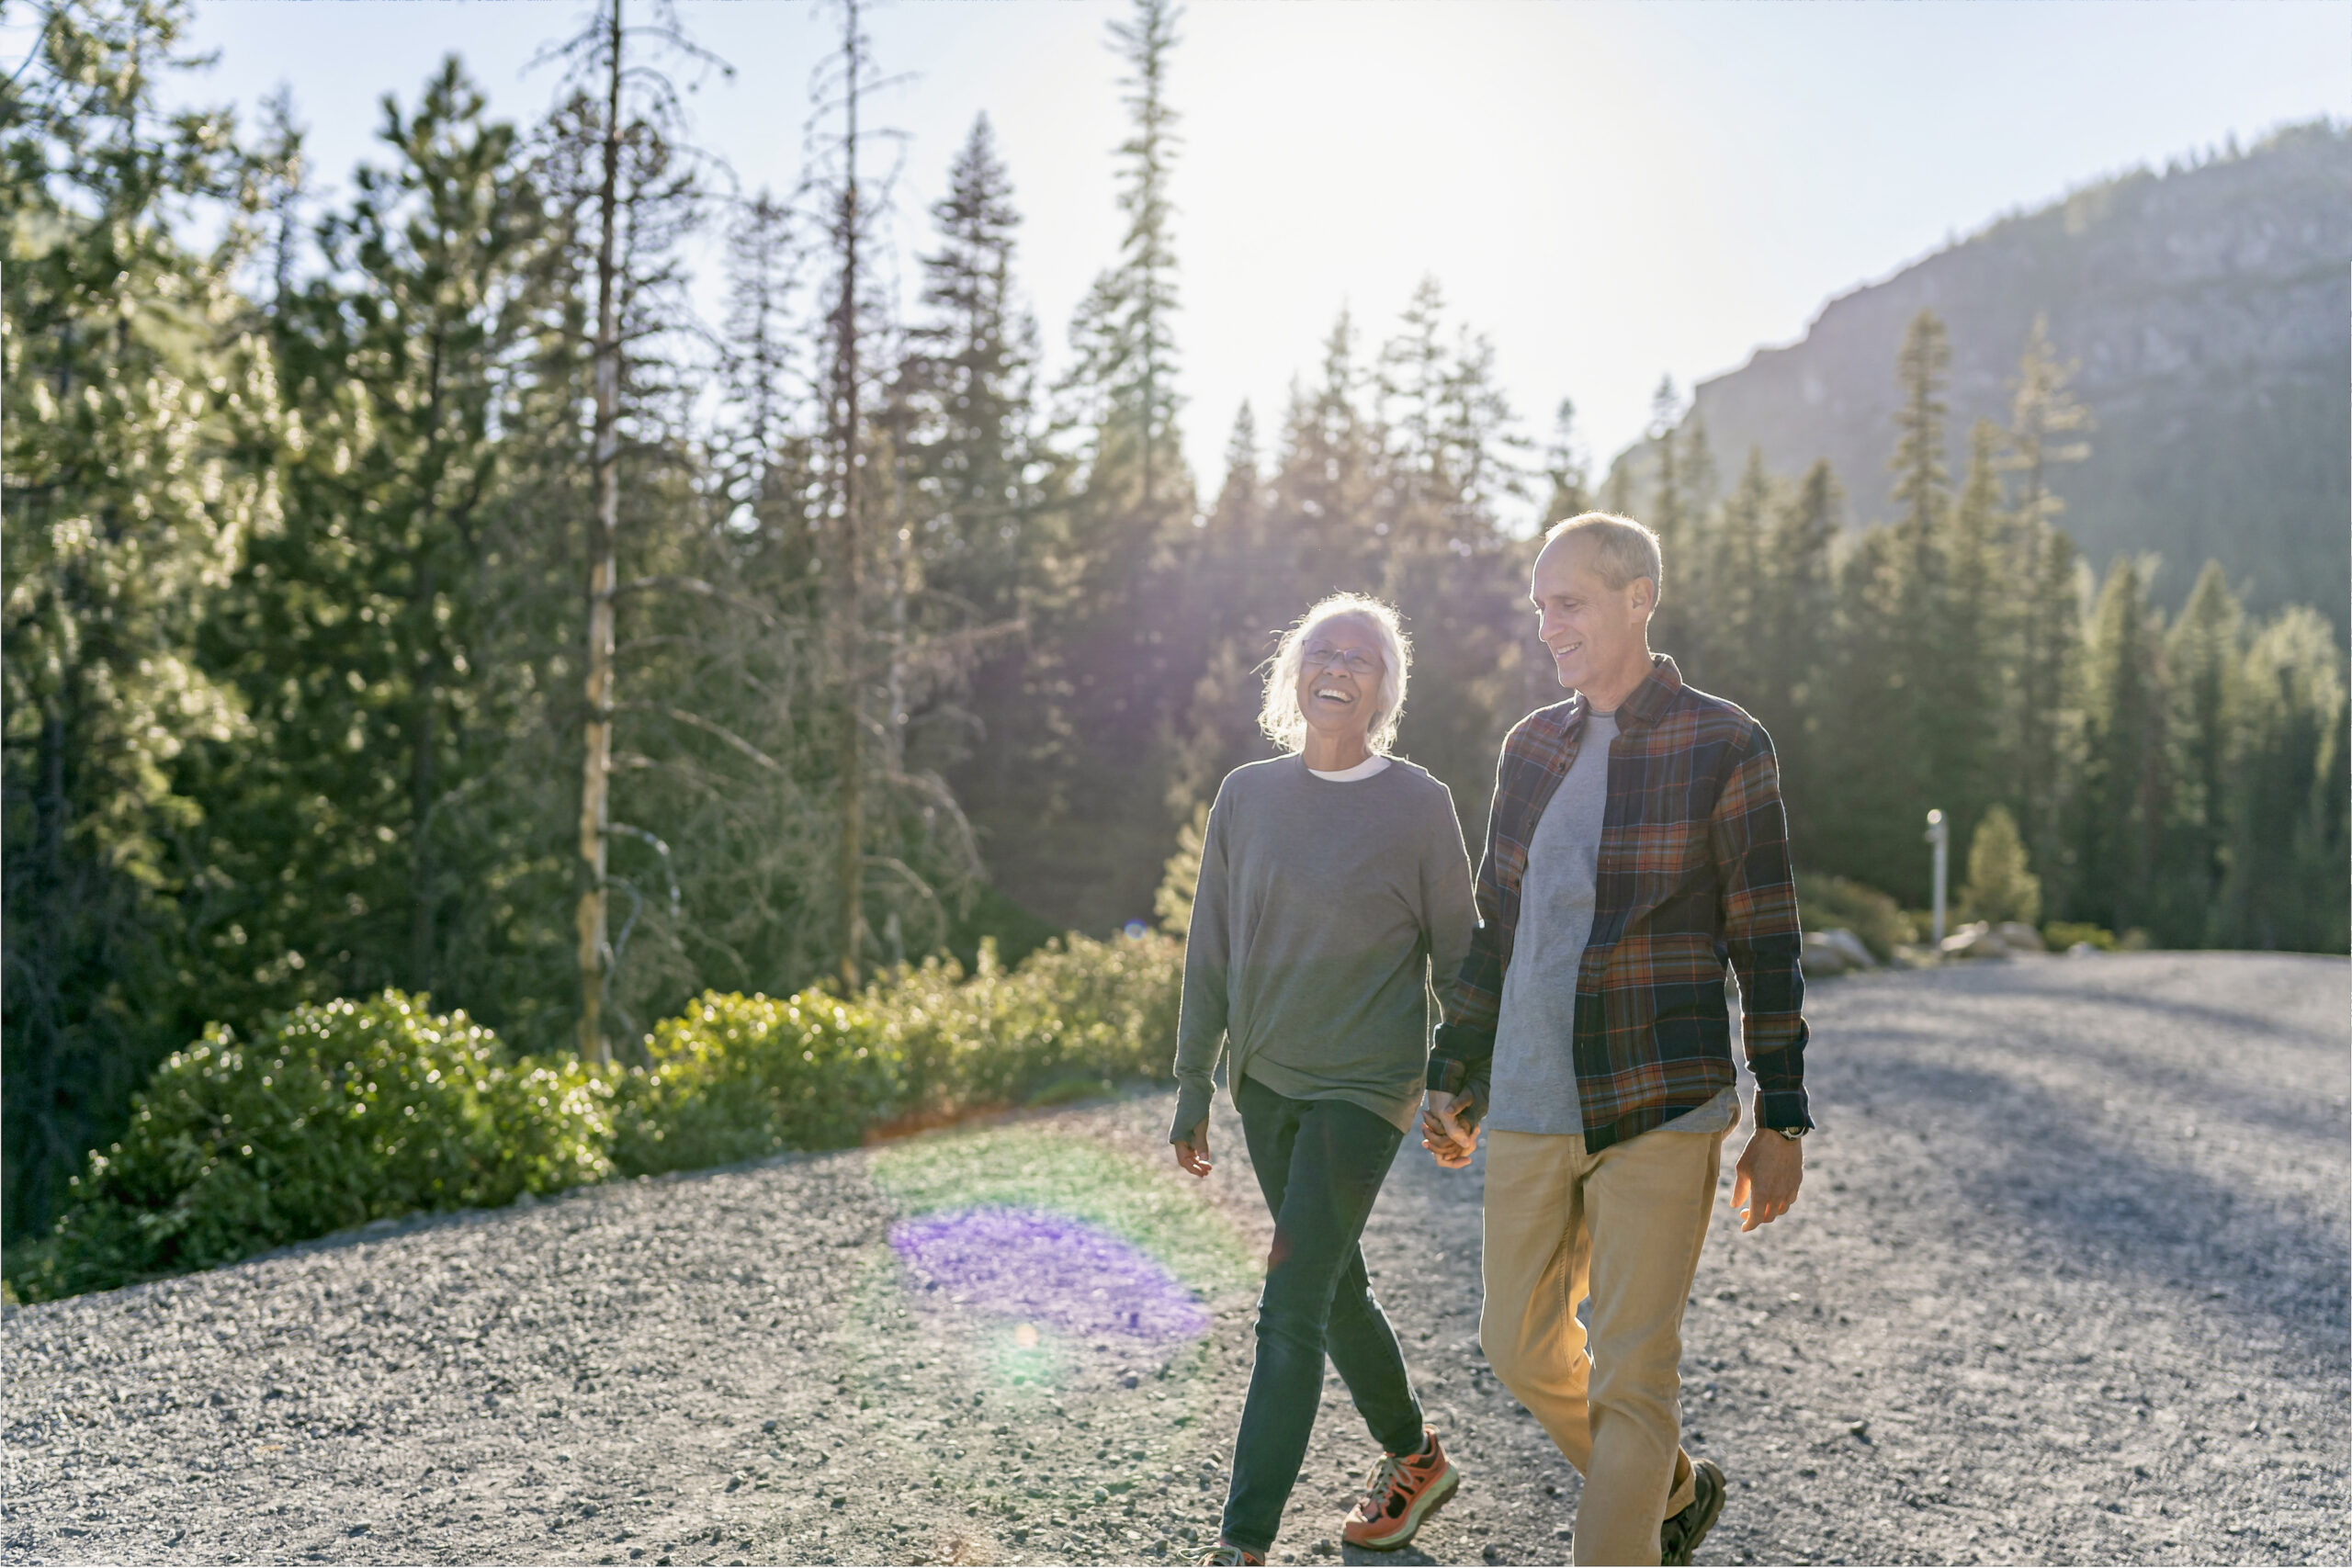 A mixed race senior couple holds hands and talks happily while enjoying a relaxing walk in nature. The happy retired couple is on vacation and hiking in Oregon. It is a beautiful, sunny day and a forest of evergreen trees lines the gravel path they are walking along.